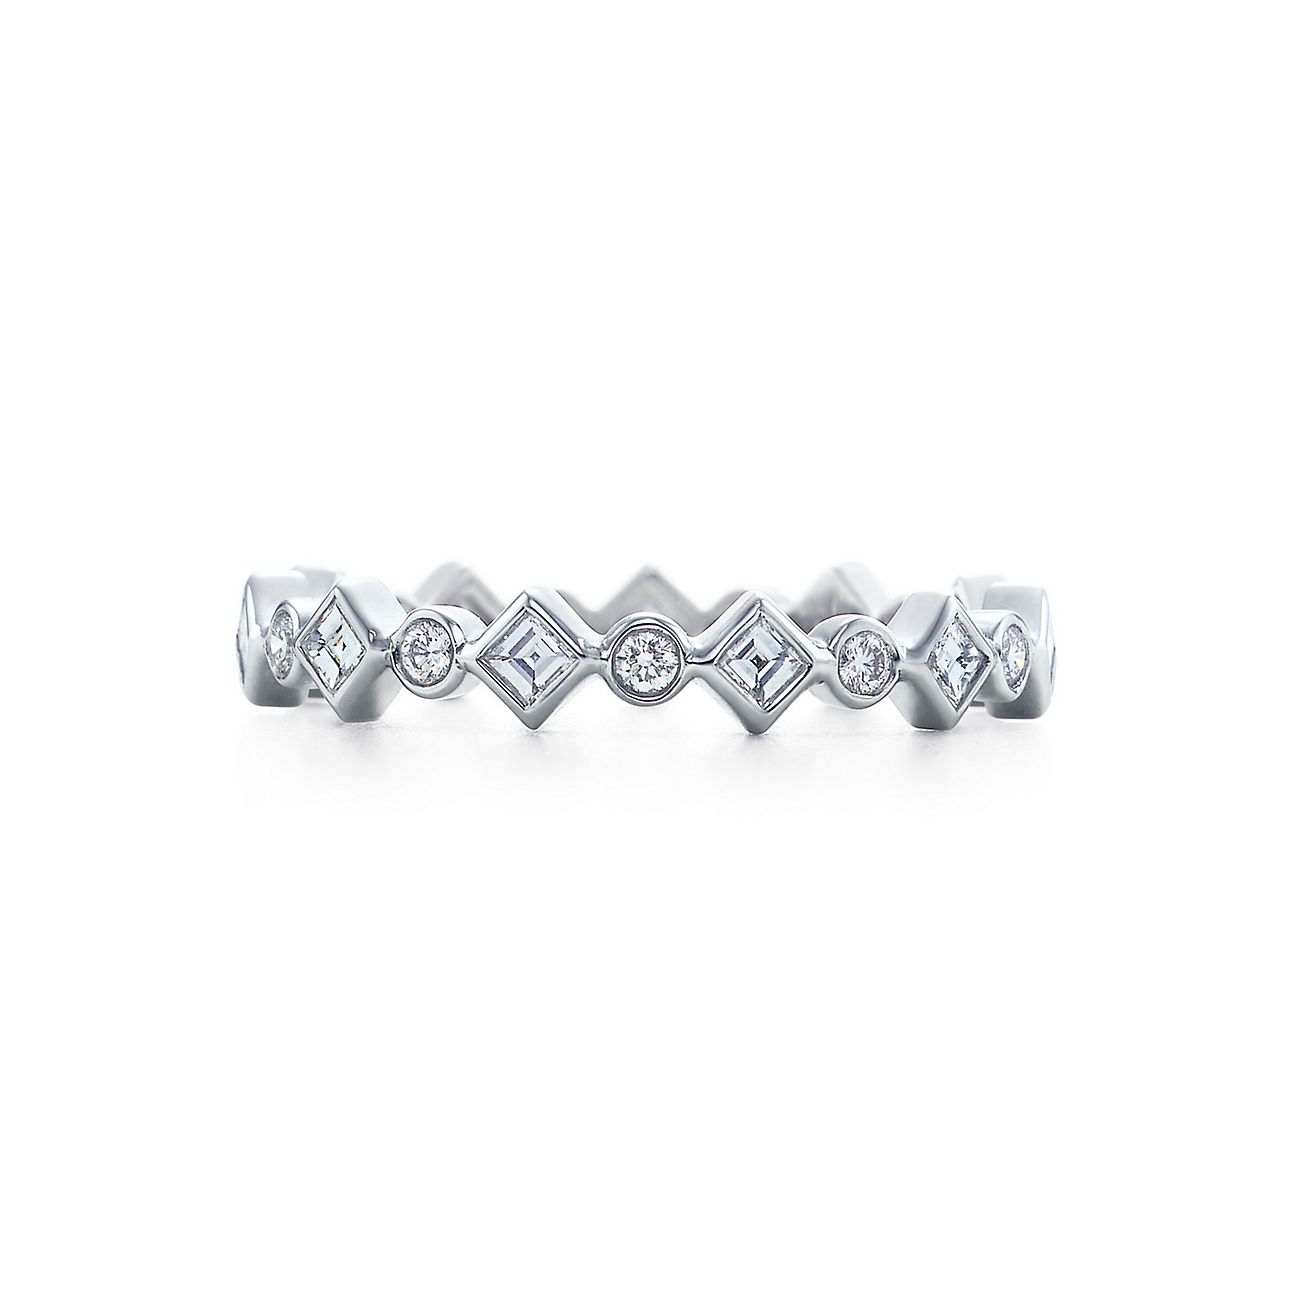 Tiffany Jazz® ring in platinum with 